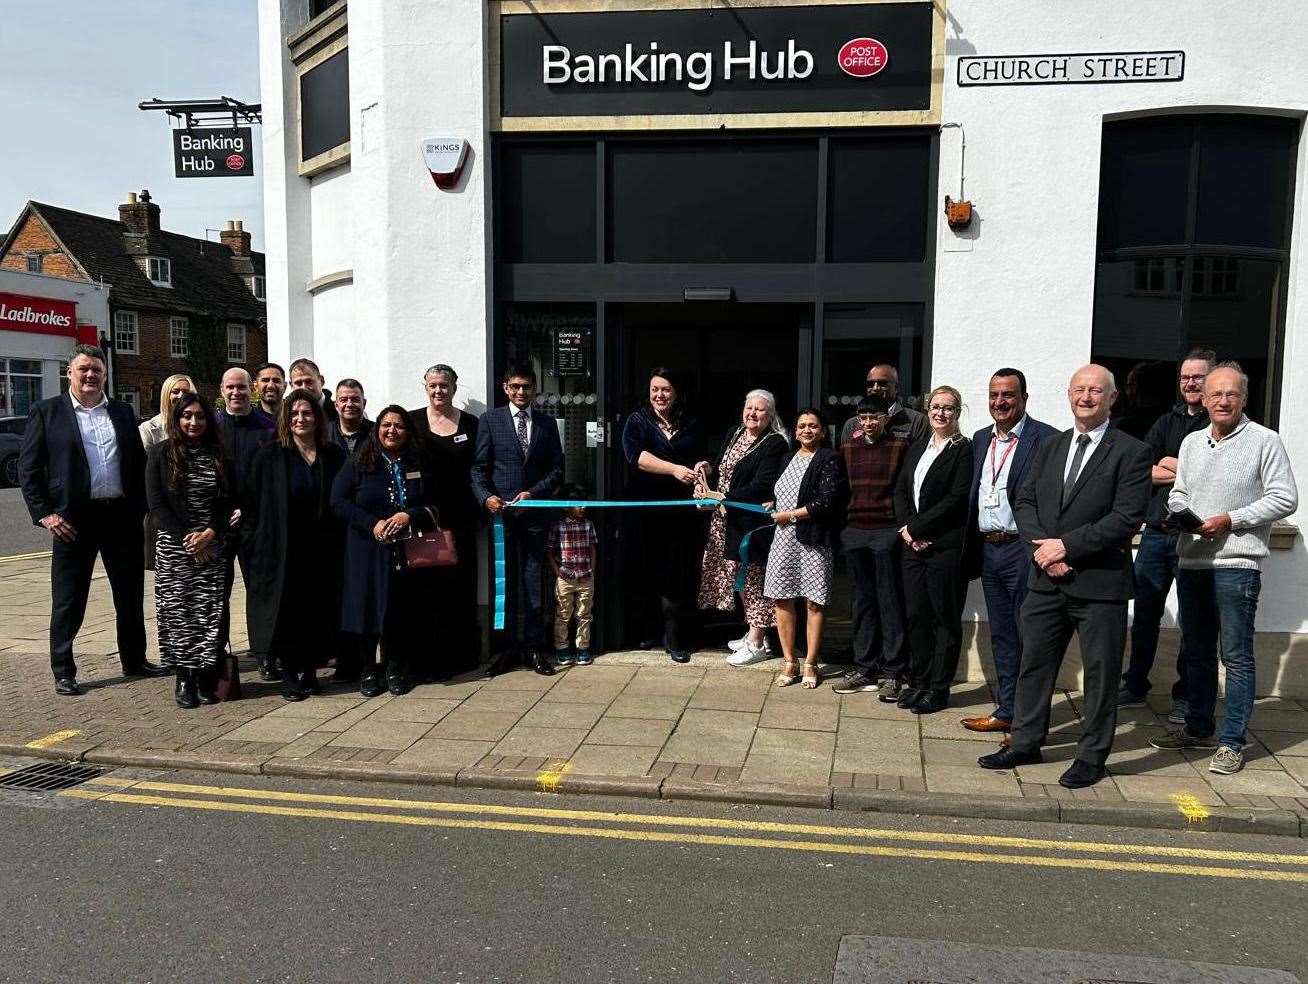 The new Banking Hub opens in Oakham